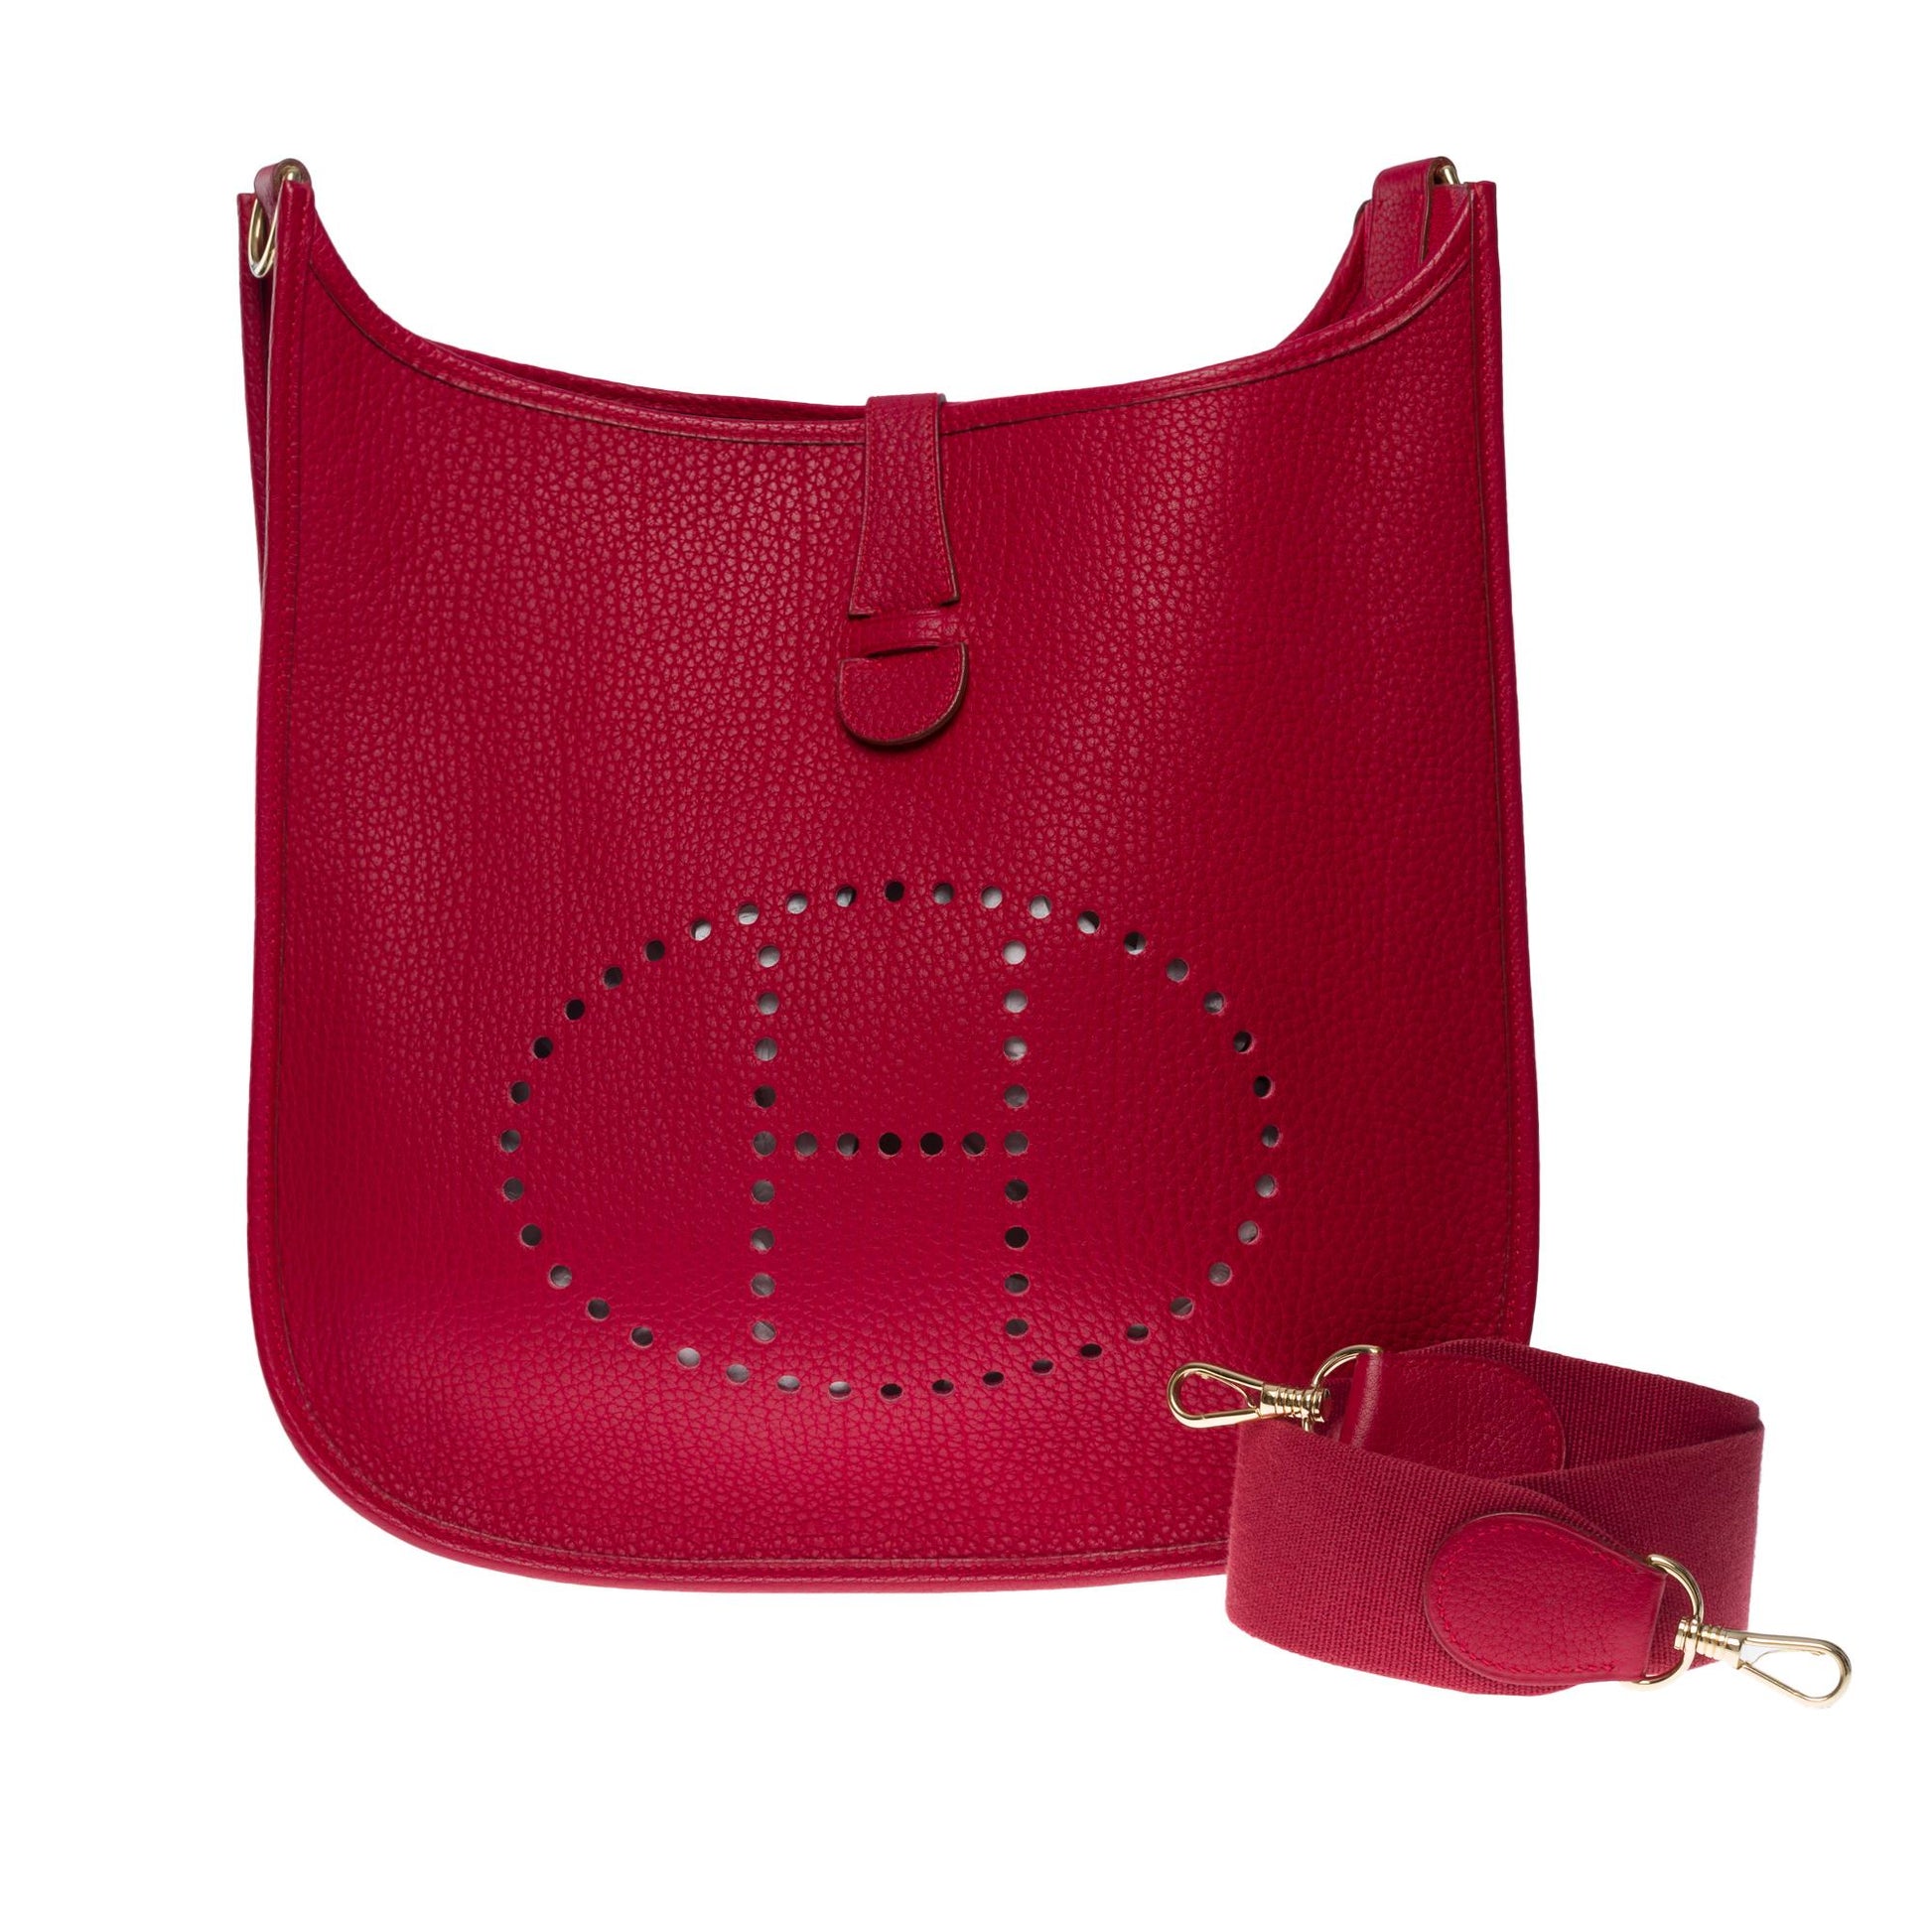 BAG EVELYNE in red Courchevel leather (30 x 33 x 7 cm)…